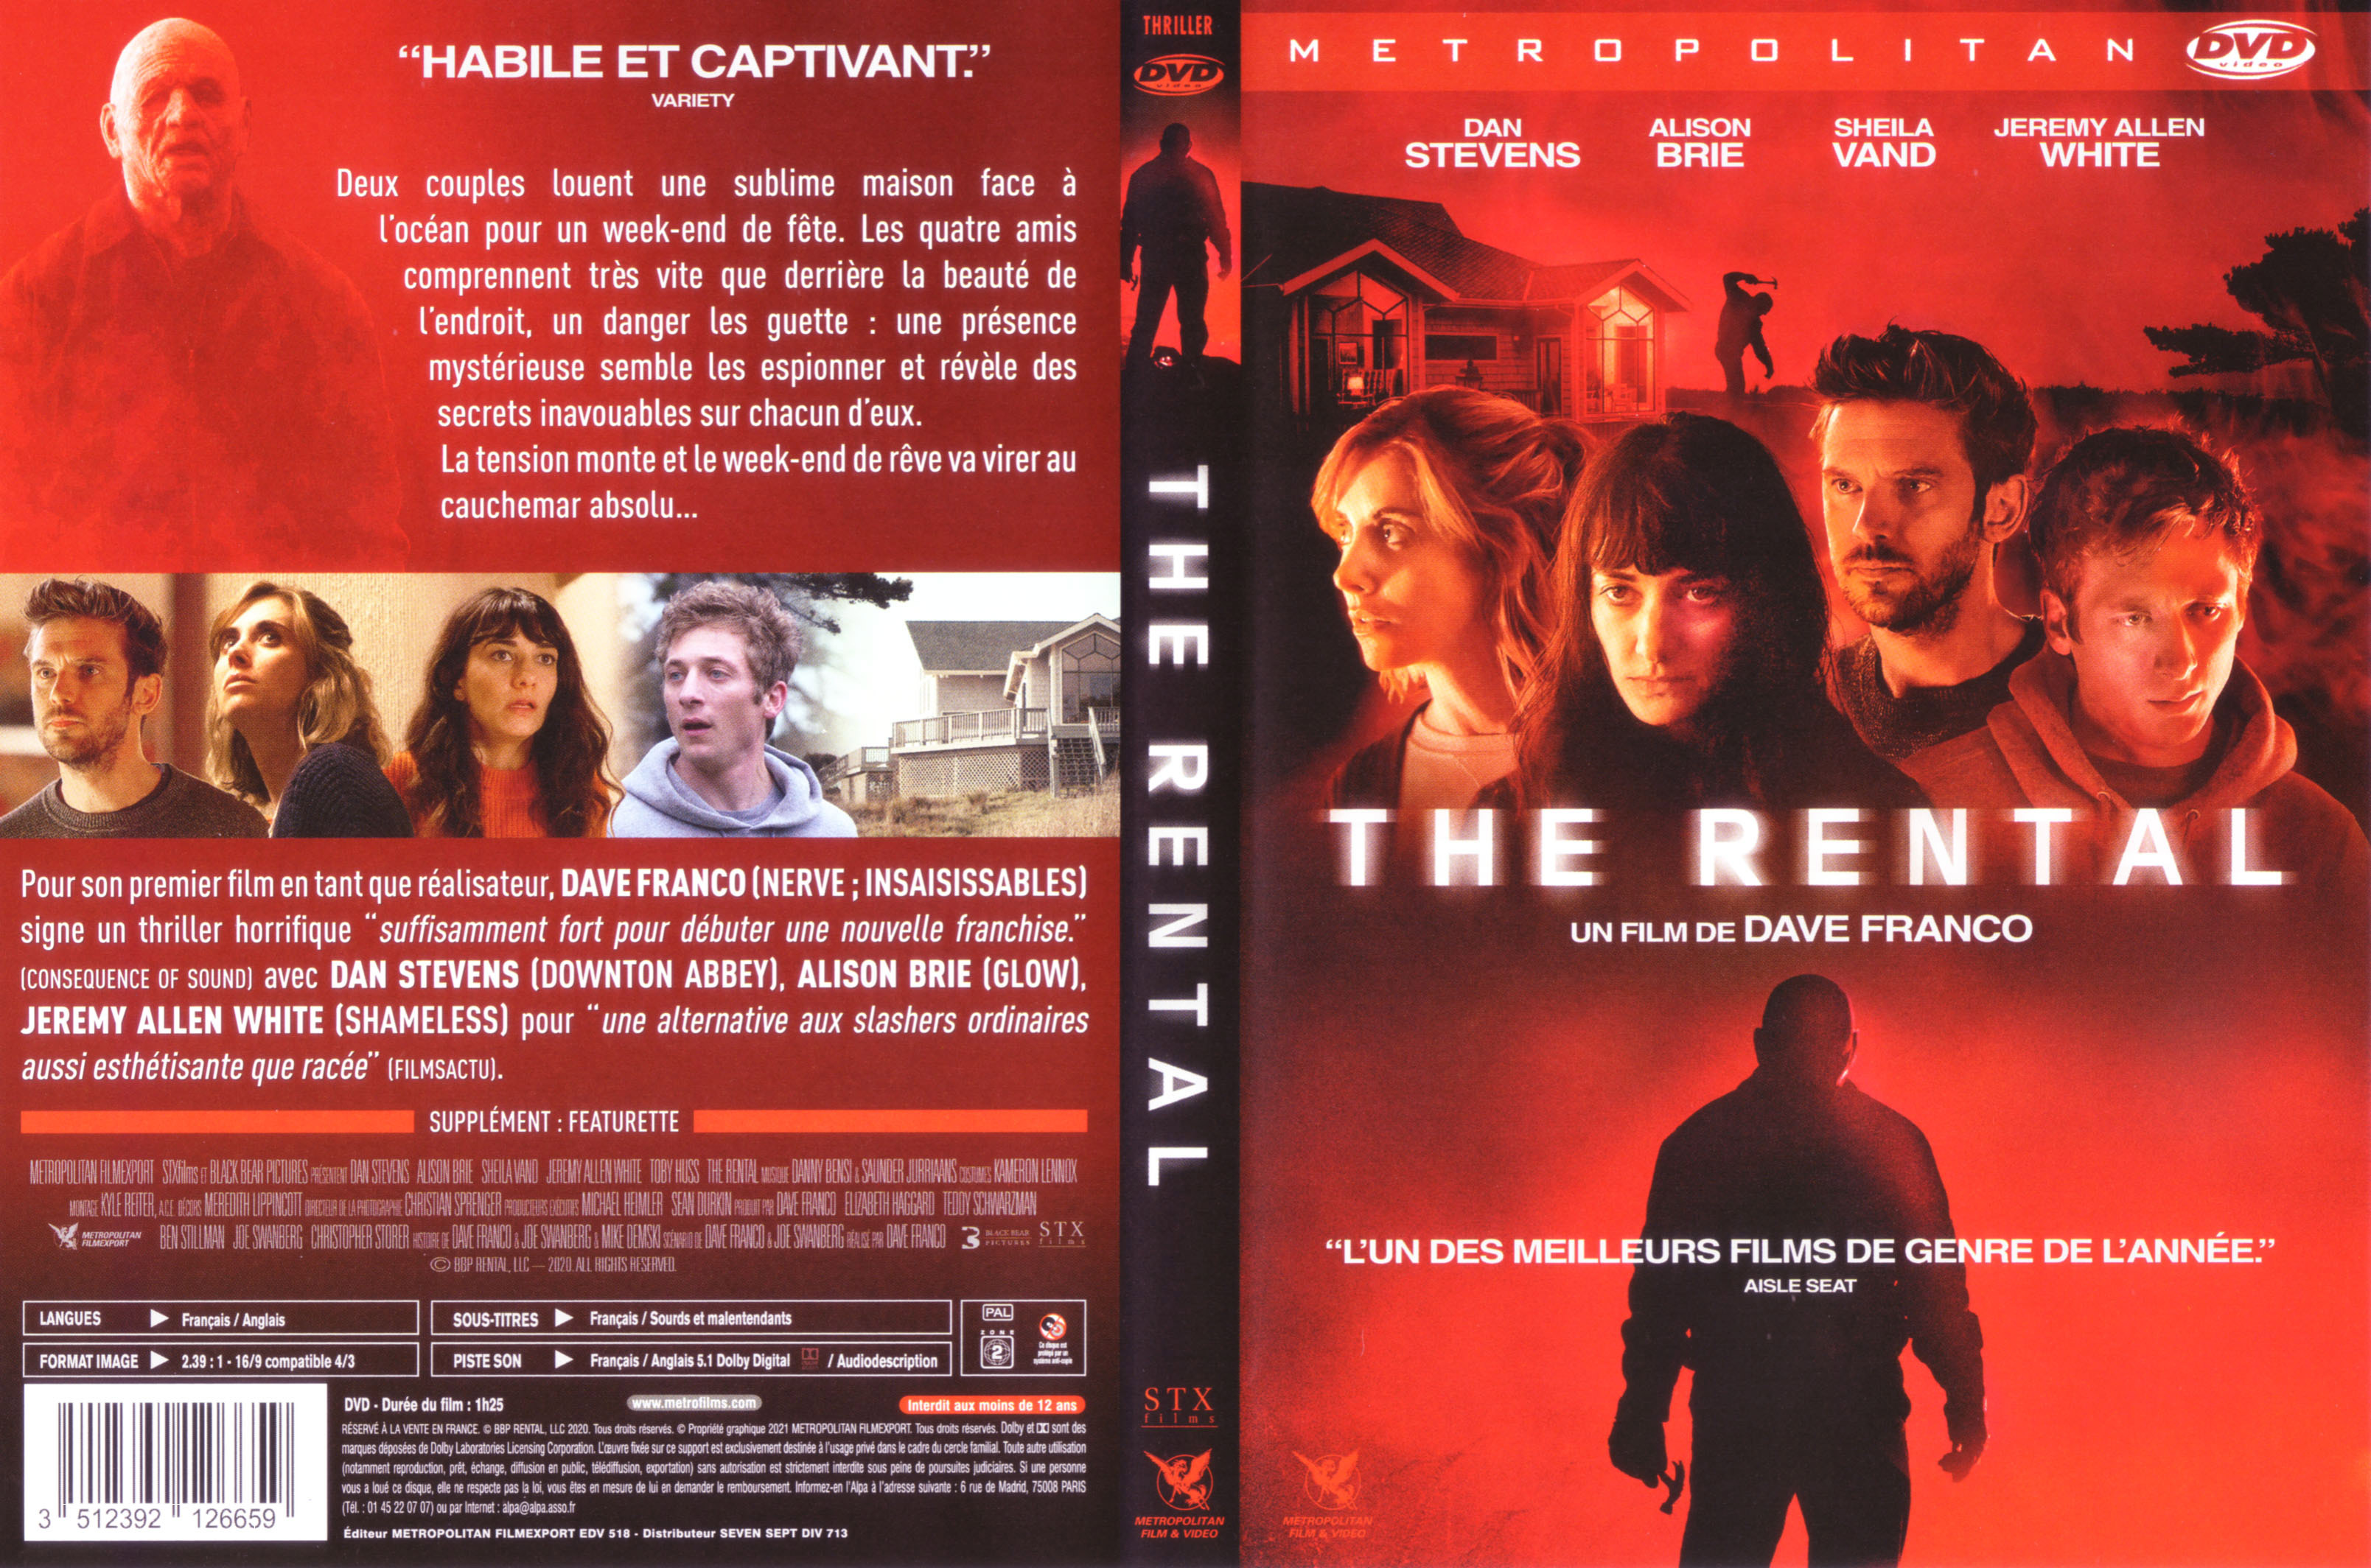 Jaquette DVD The rental